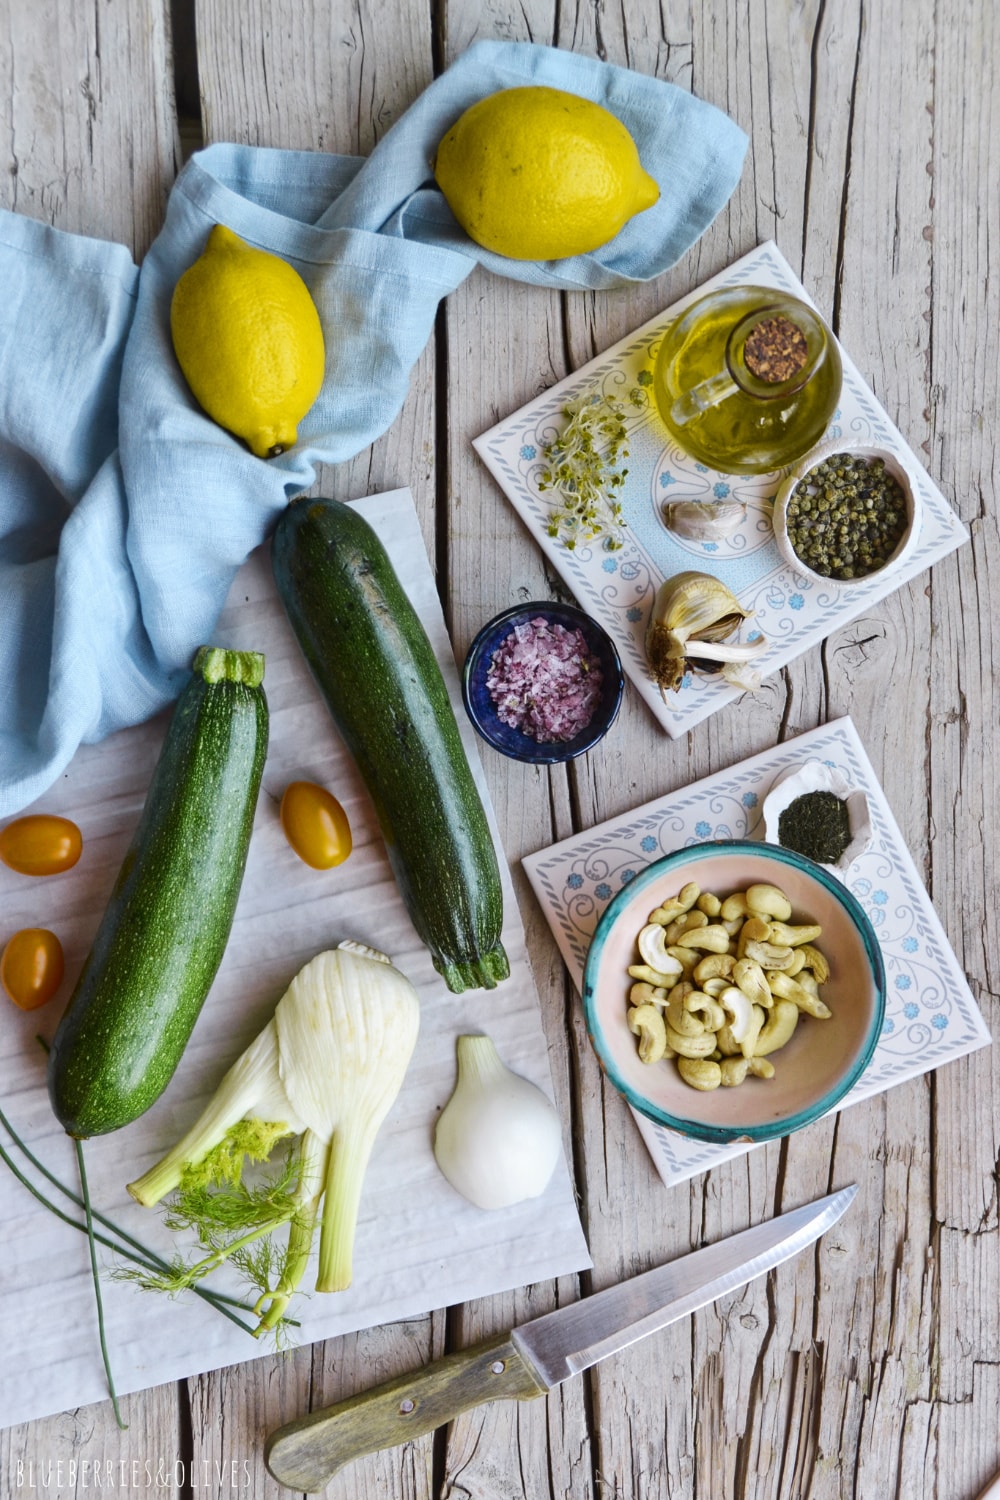 Ingredients for chilled raw soup, zucchinis, lemon, sprouts, cashew nuts on flat lay with light blue linen tablecloth